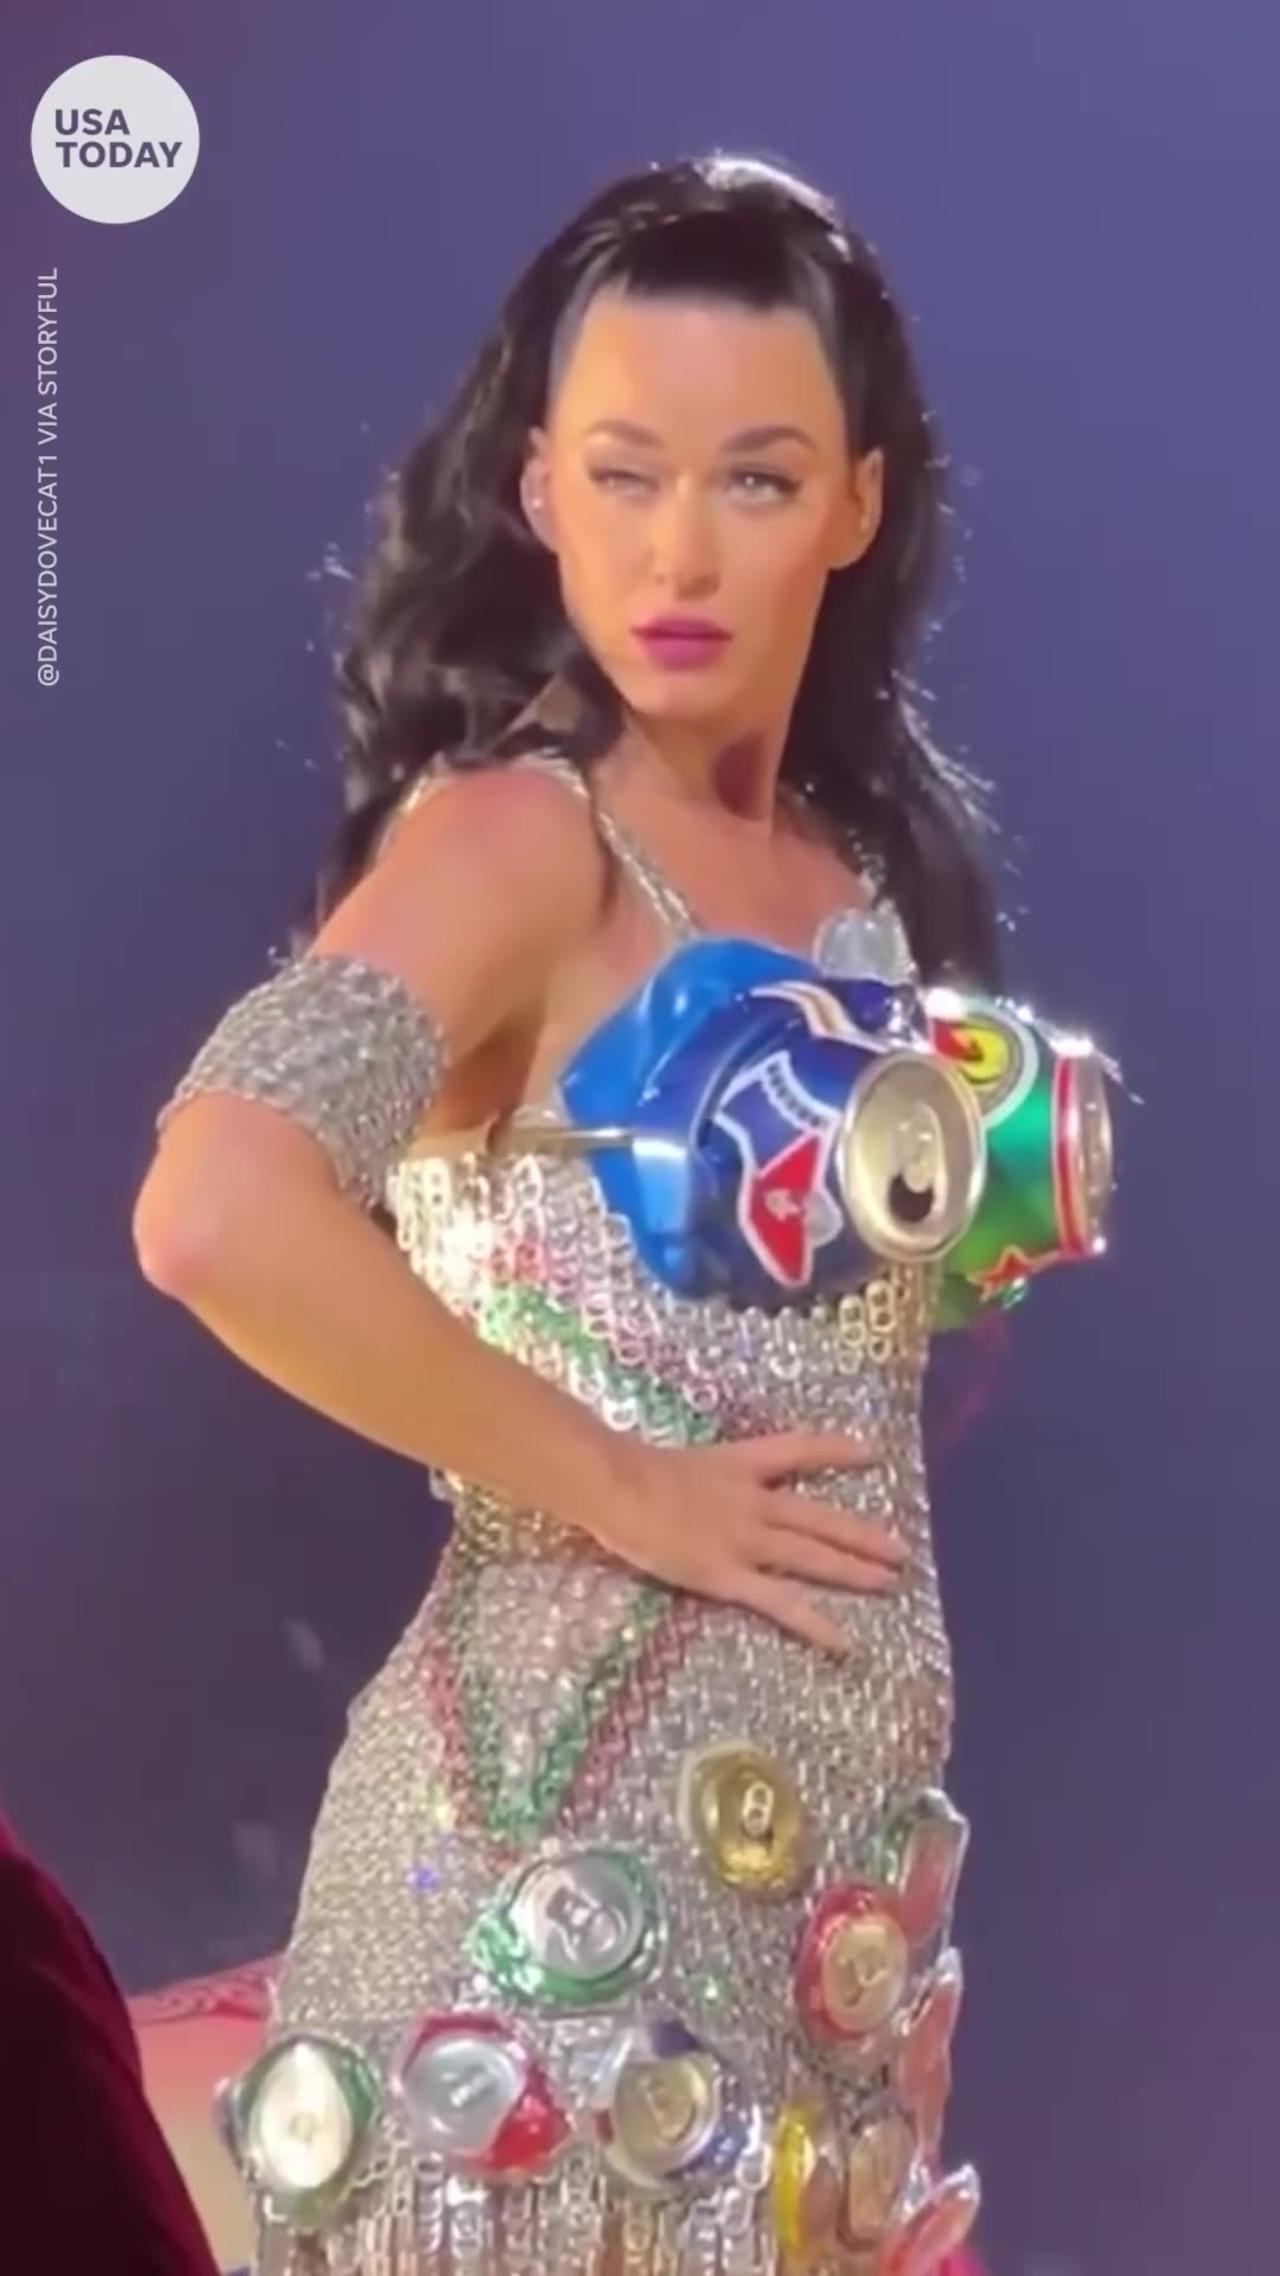 Katy Perry goes viral for mid-concert eye ‘glitch’ | USA TODAY